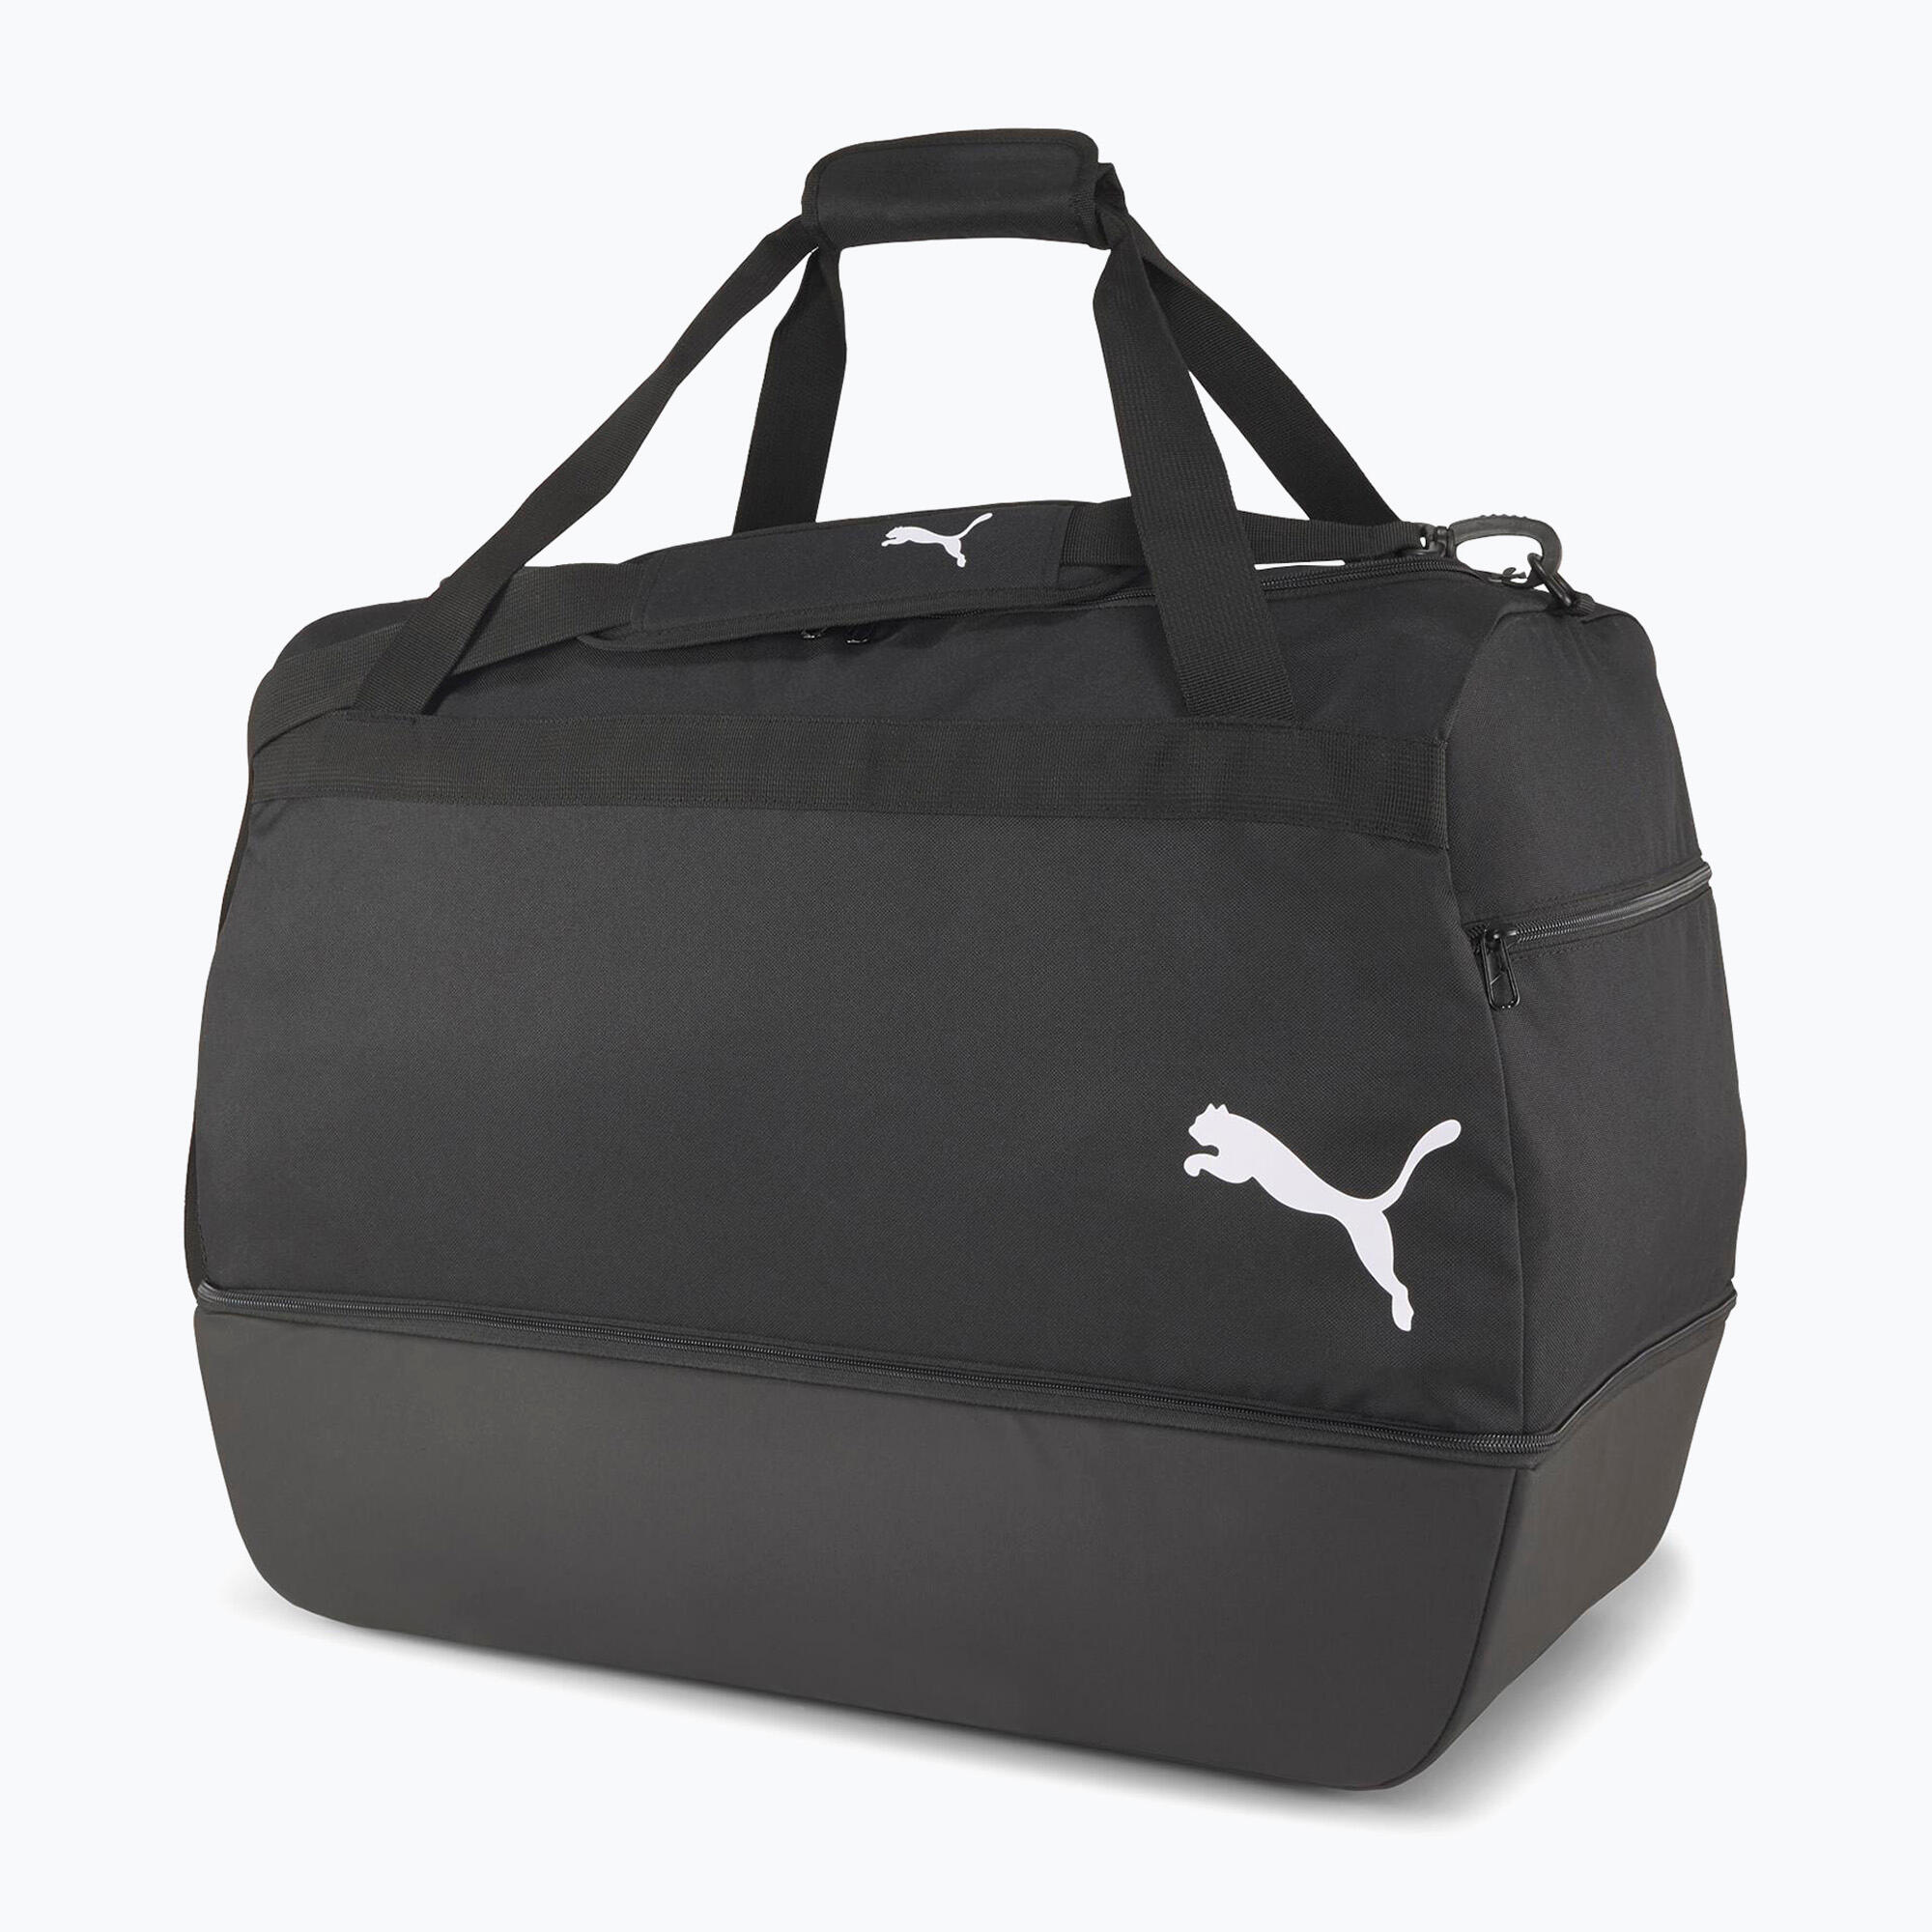 Puma Team Goal 23 Teambag with Boot Compartment, Black 4/4